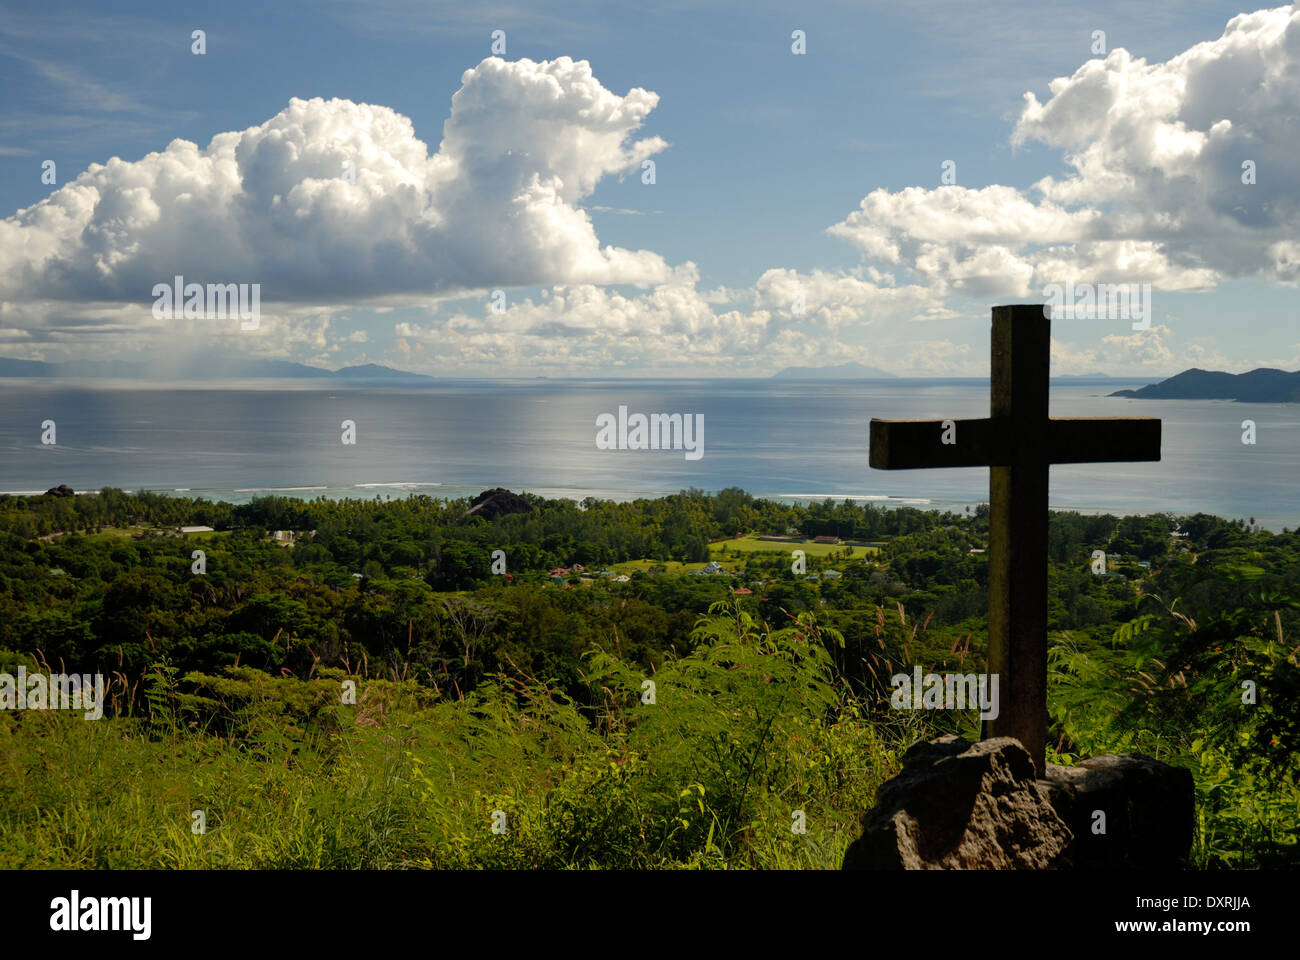 View from Belle Vue with Cross in Foreground and Clouds and Islands in Distance Stock Photo